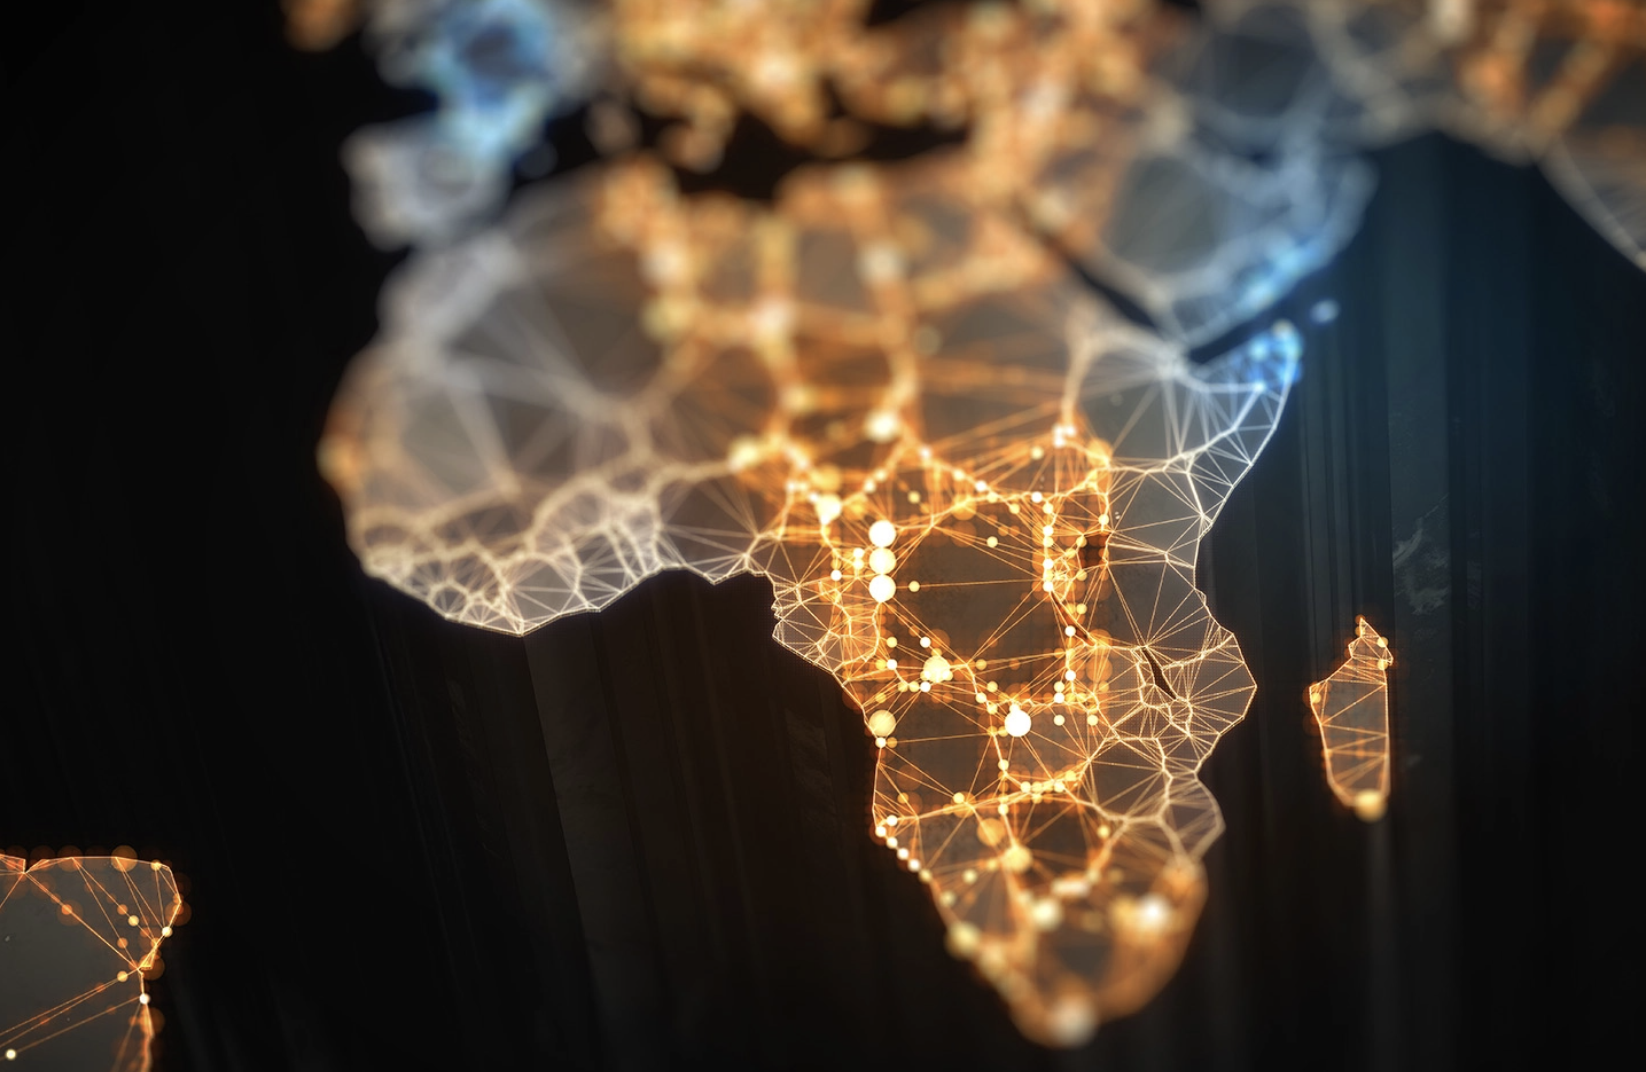 If Africa masters the rules of artificial and data intelligence, it can solve some of its biggest issues